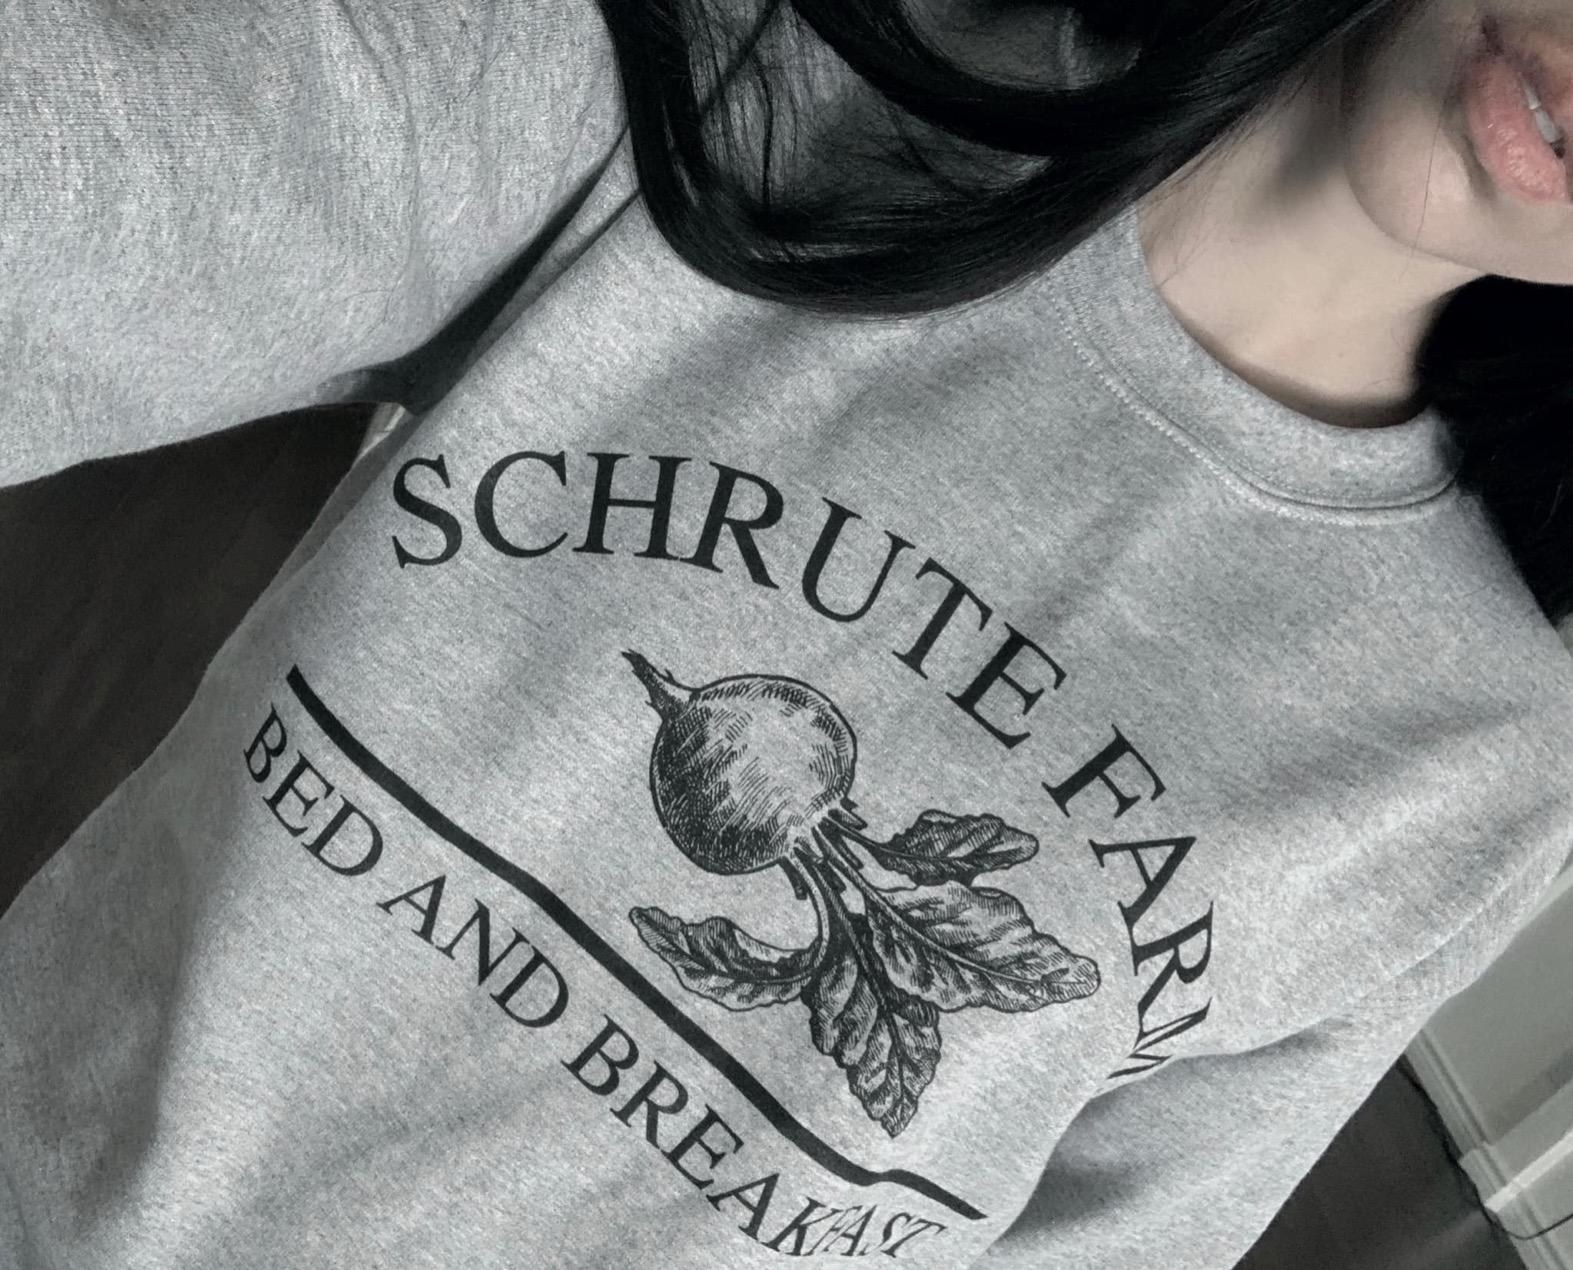 sweatshirt with beet on it that says schrute farm bed and breakfast